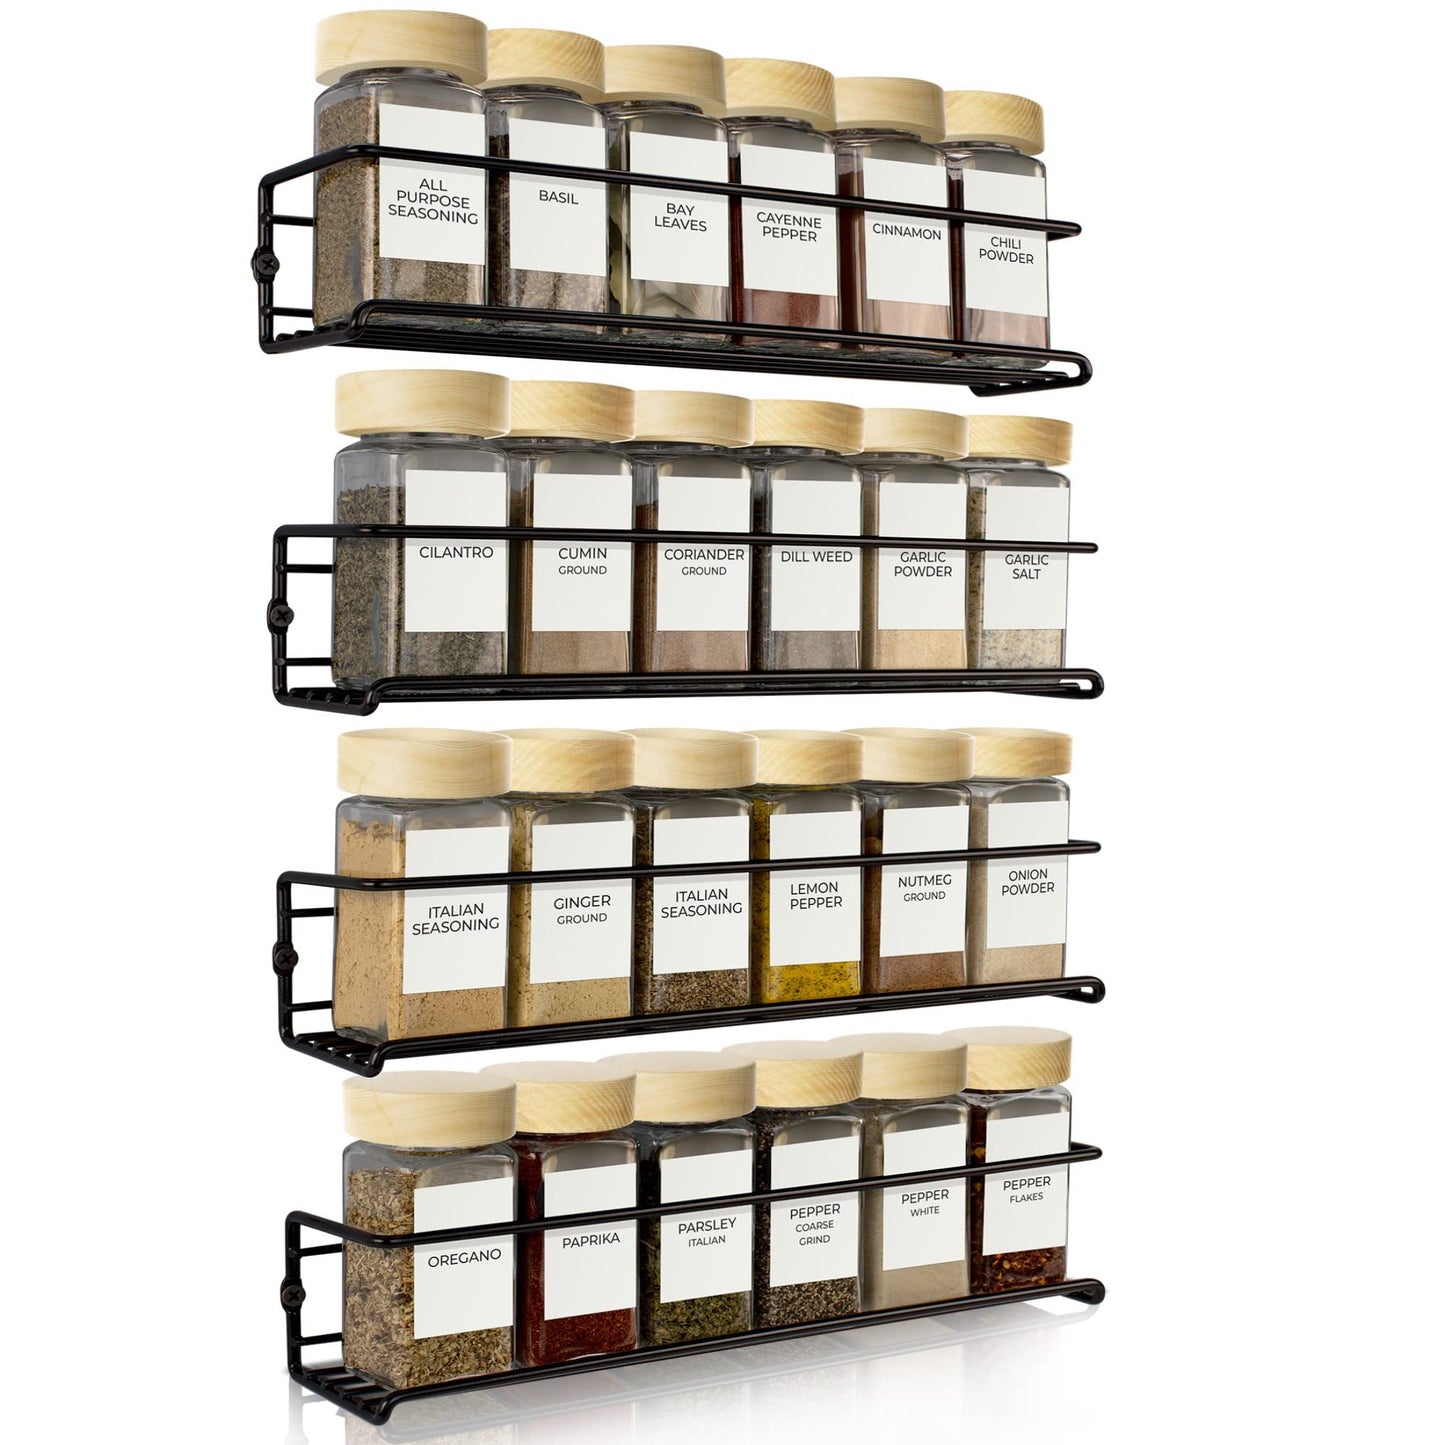 ZICOTO Space Saving Spice Rack Organizer for Cabinets or Wall Mounts - Easy To Install Set of 4 Hanging Racks - Perfect Seasoning Organizer For Your Kitchen Cabinet, Cupboard or Pantry Door